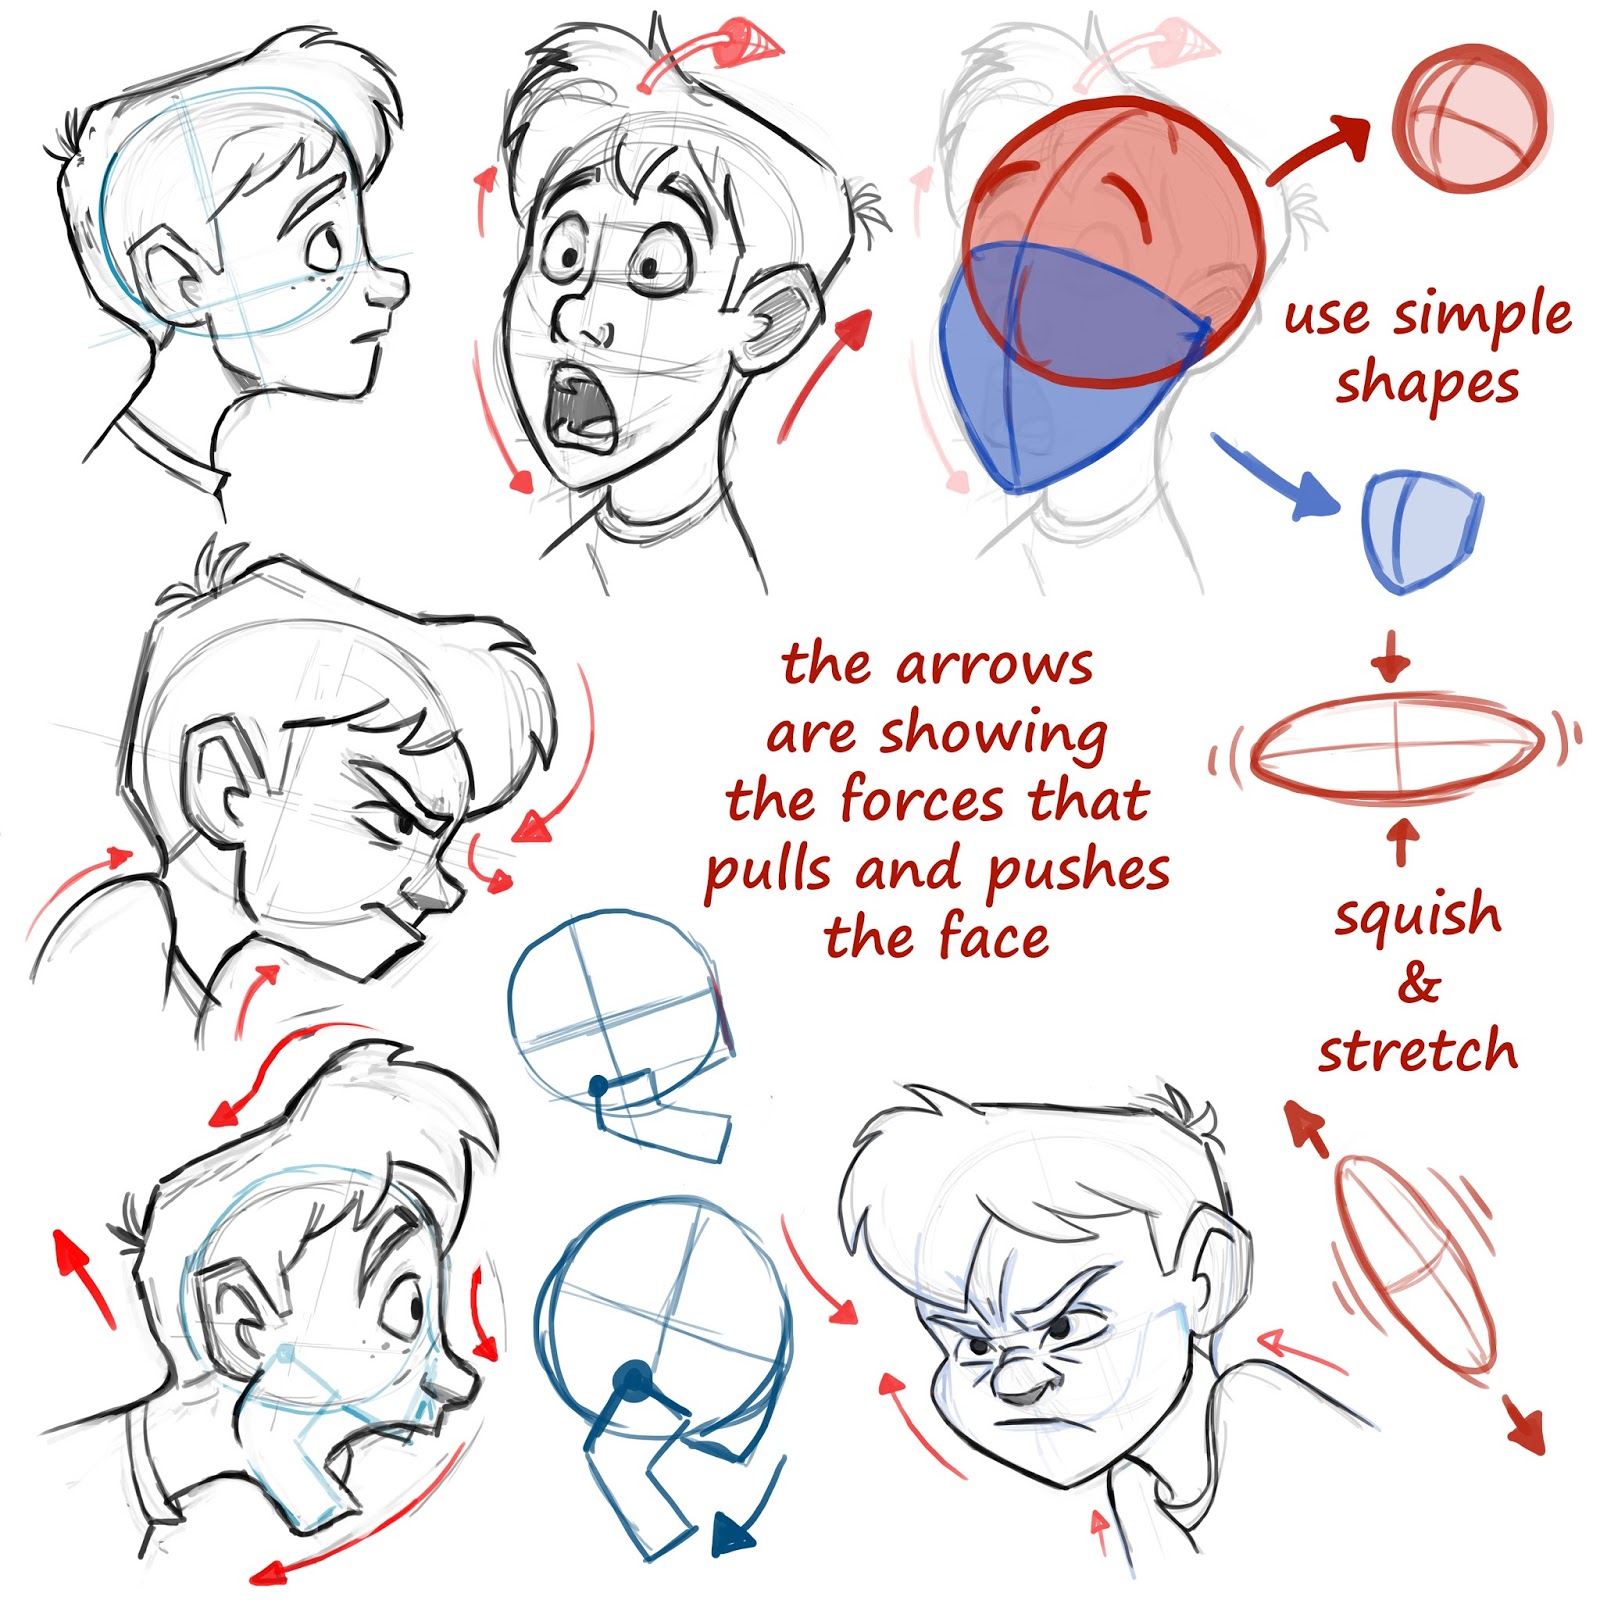 Learning drawing principles: face